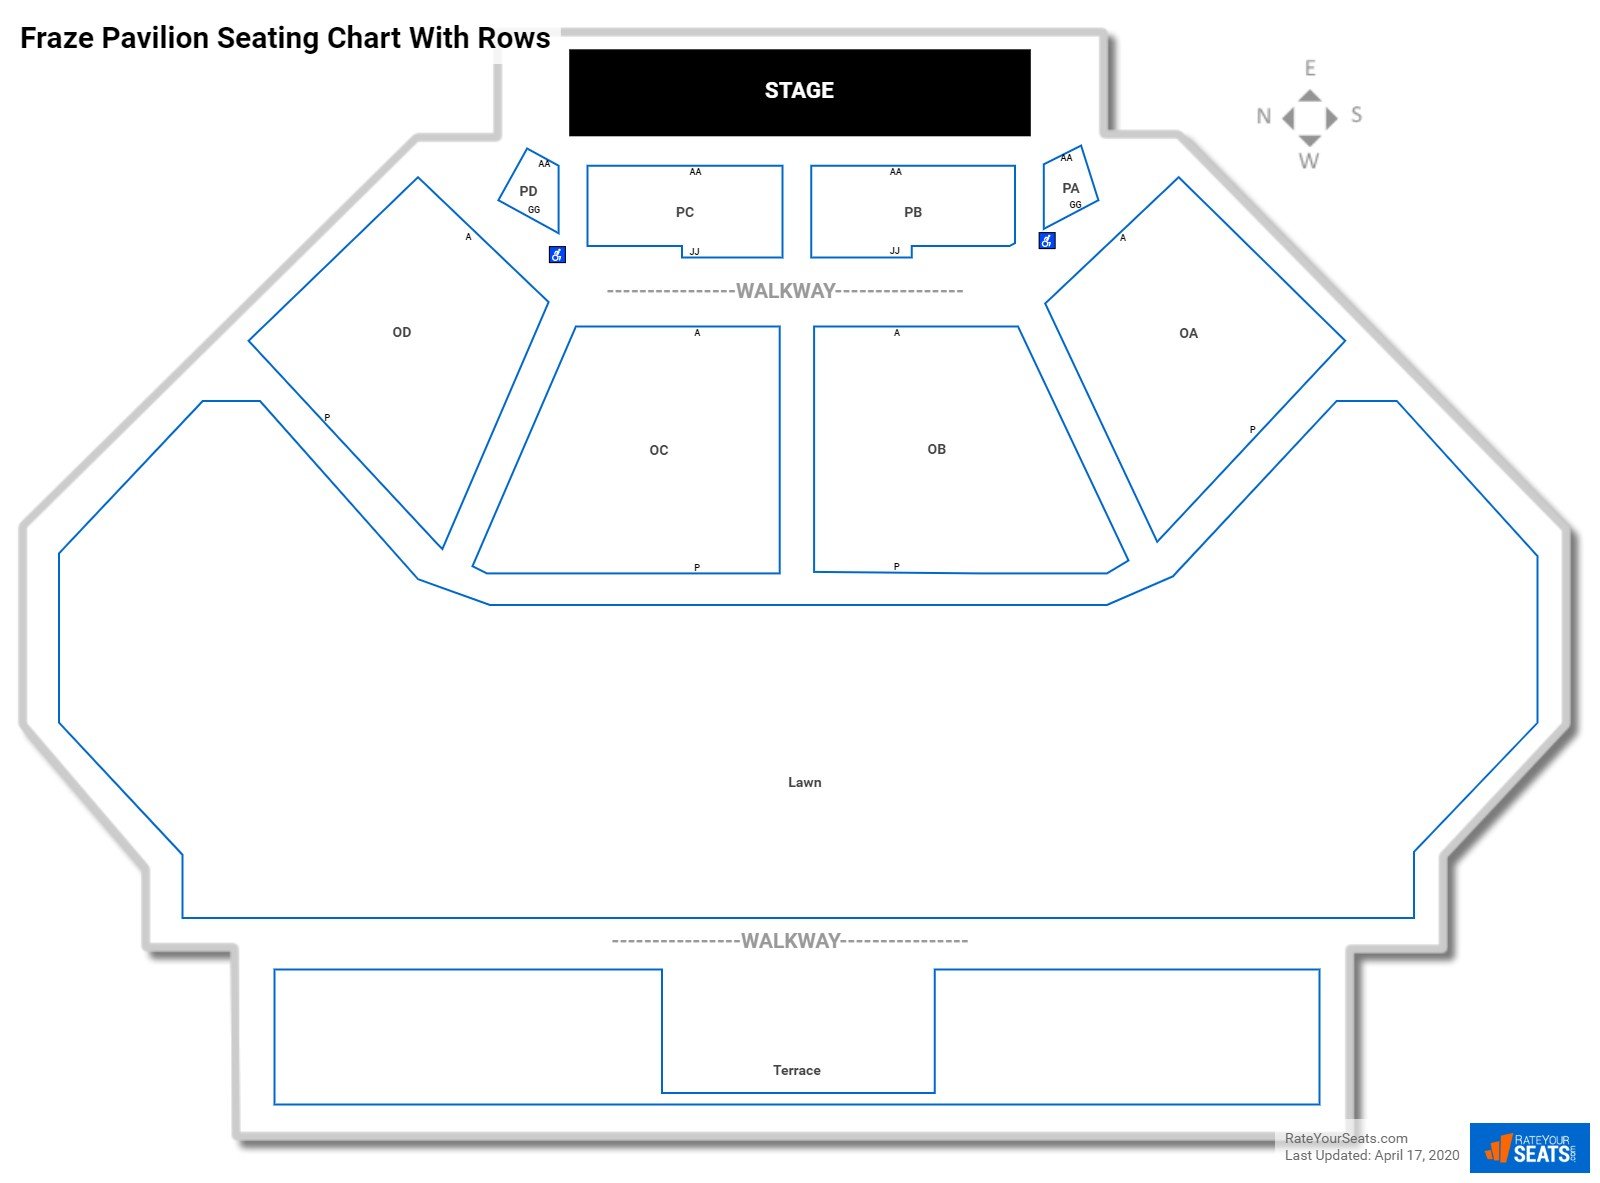 Fraze Pavilion seating chart with row numbers